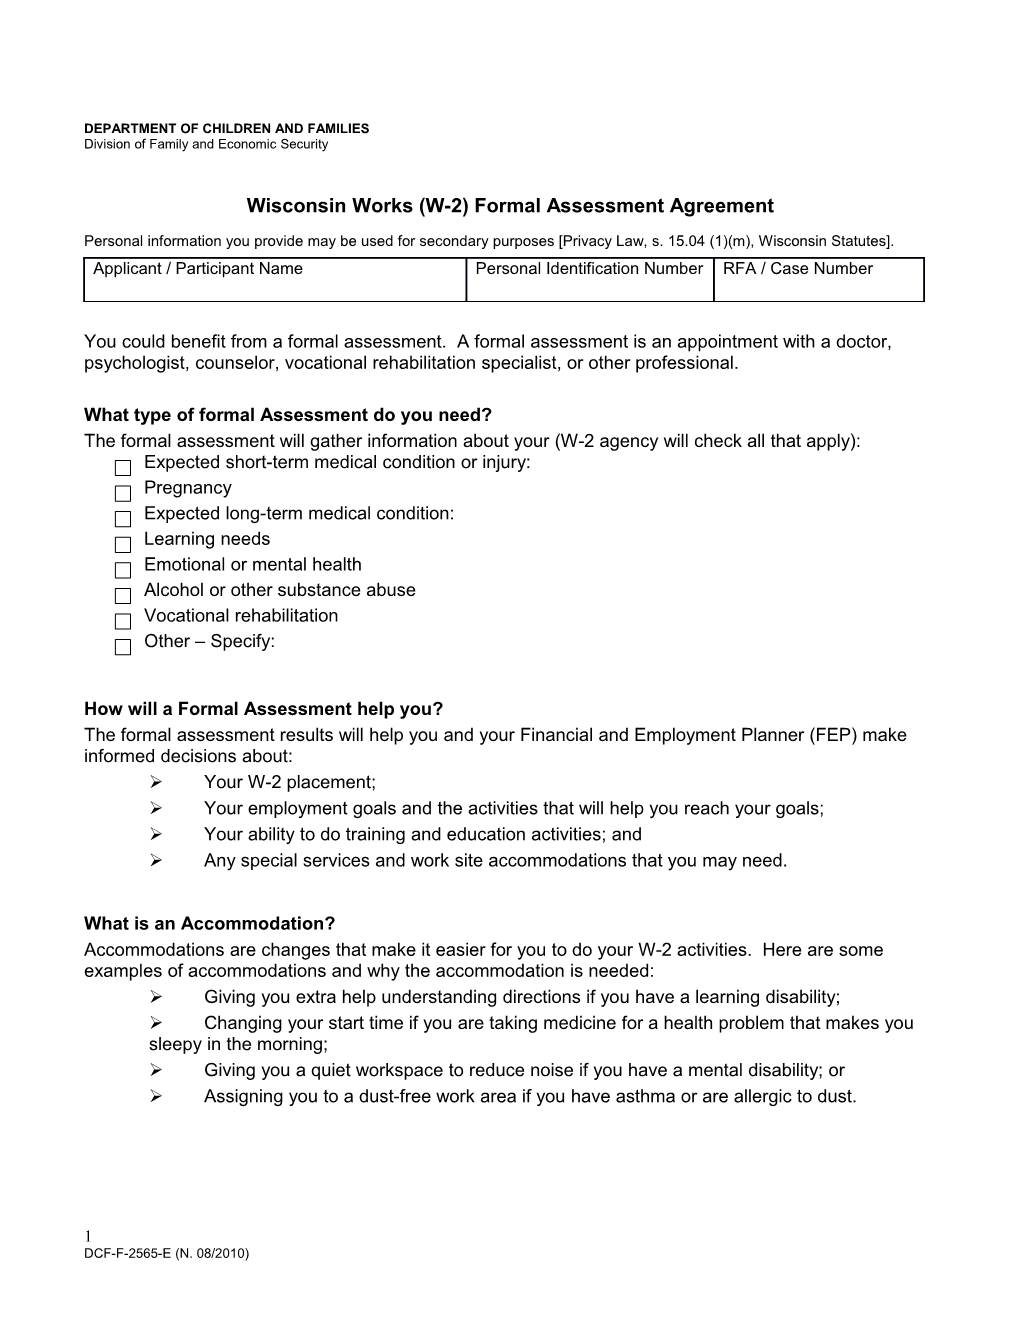 Wisconsin Works (W-2) Formal Assessment Agreement